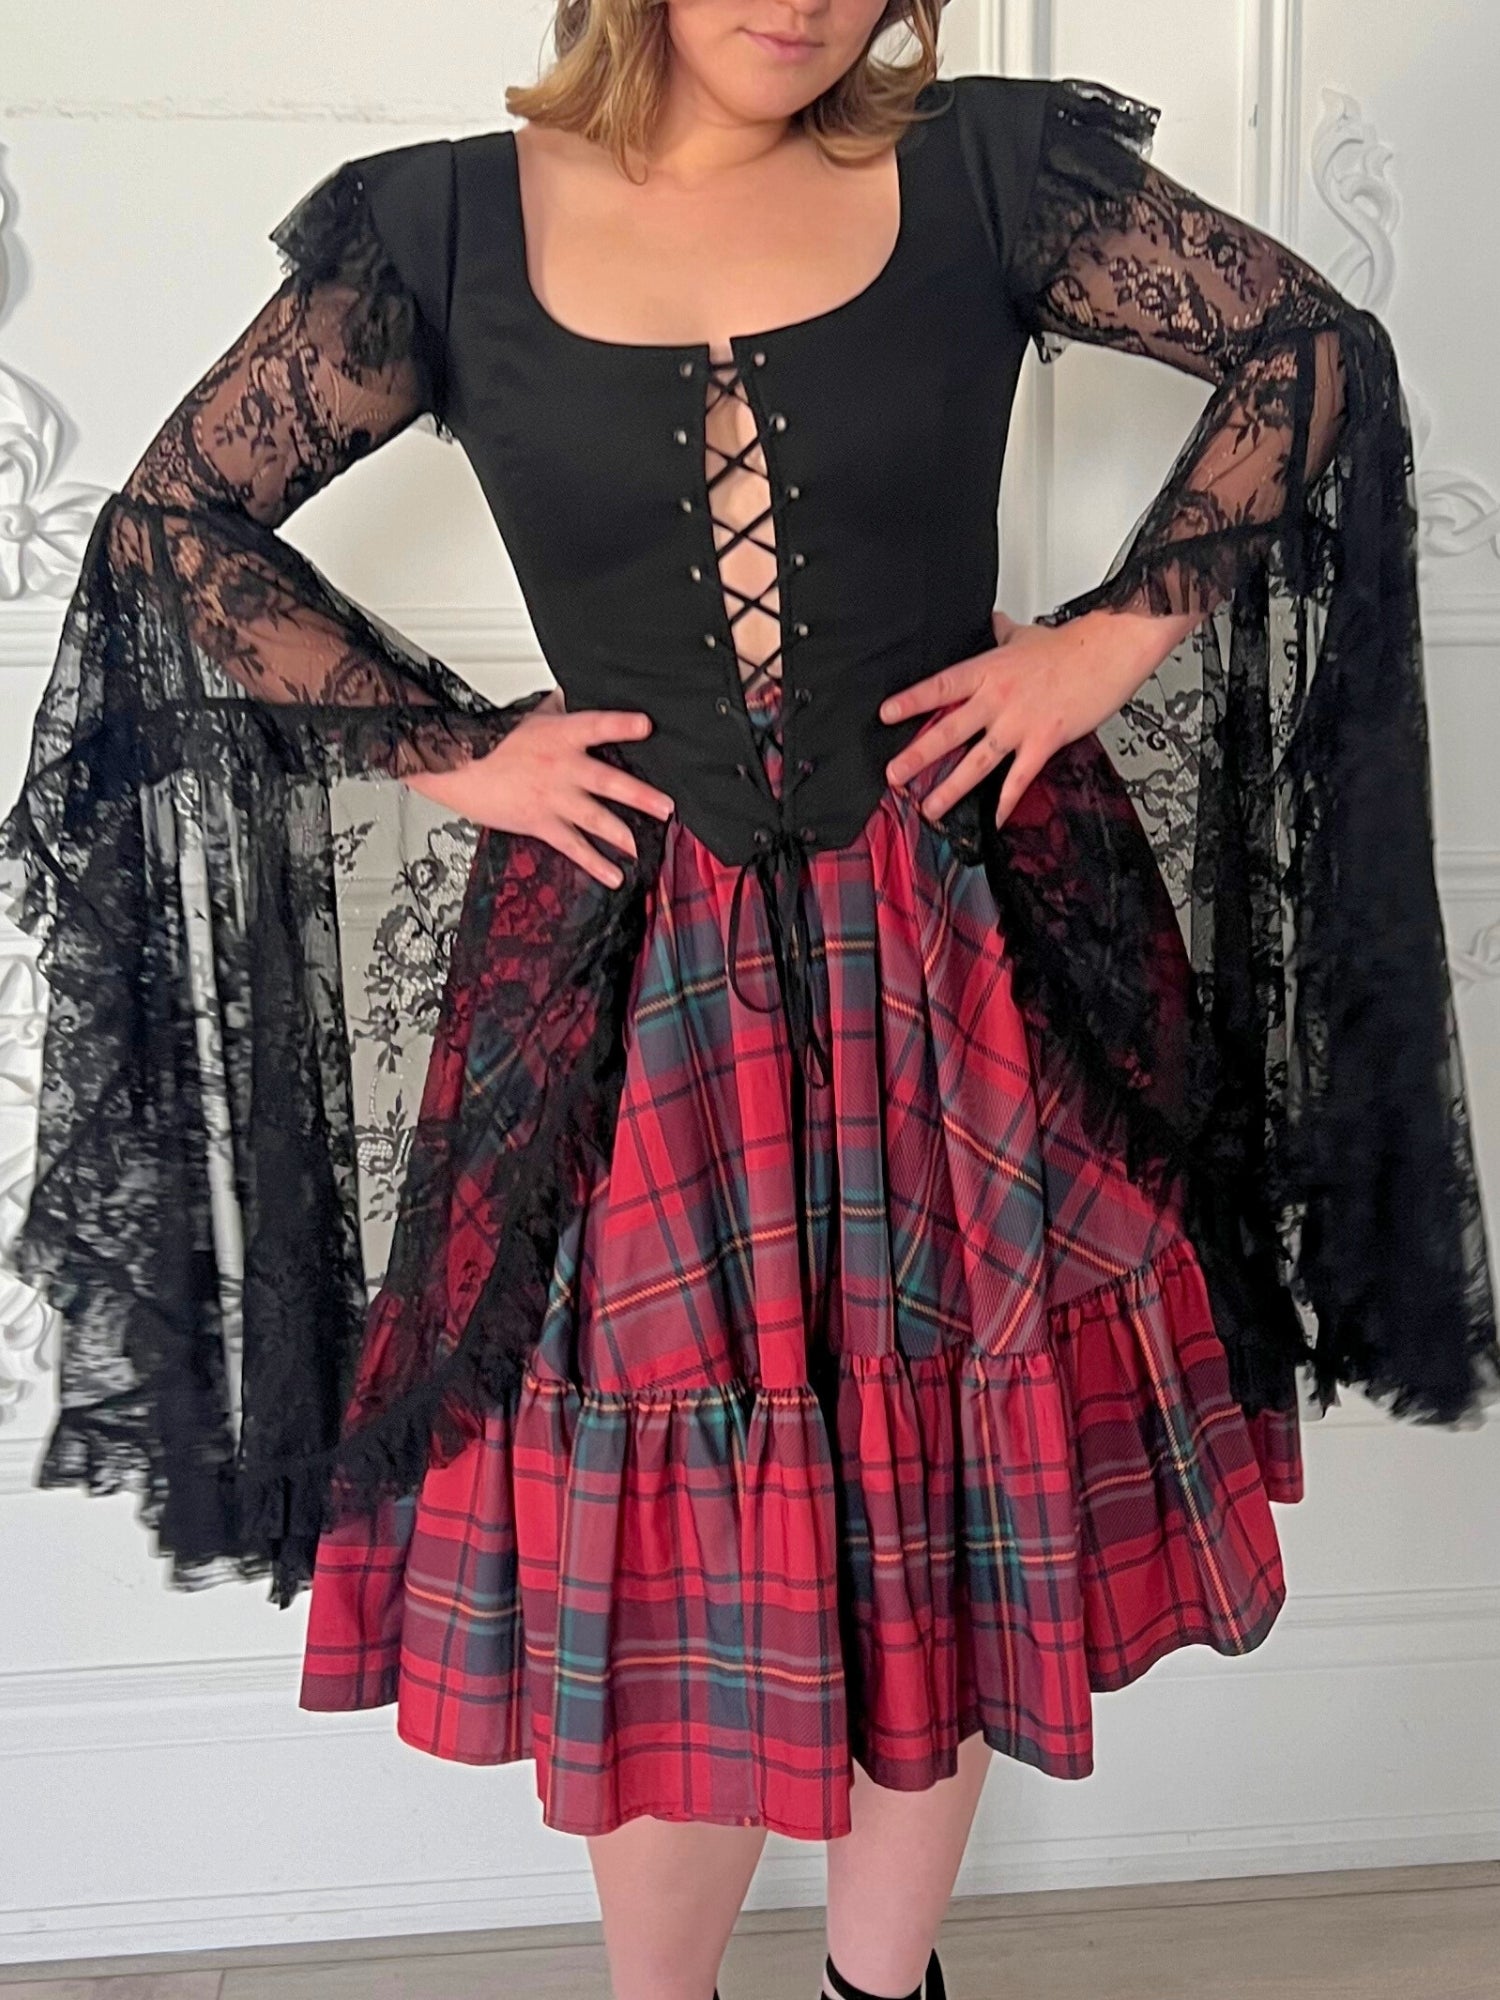 The Guinevere's Revenge Corset Top - Guinevere's revenge made in the rich black hue exudes timeless allure, while the corset's structured design ensures a flattering fit, cinching at the waist to accentuate your curves. The luxurious theatrical lace sleev